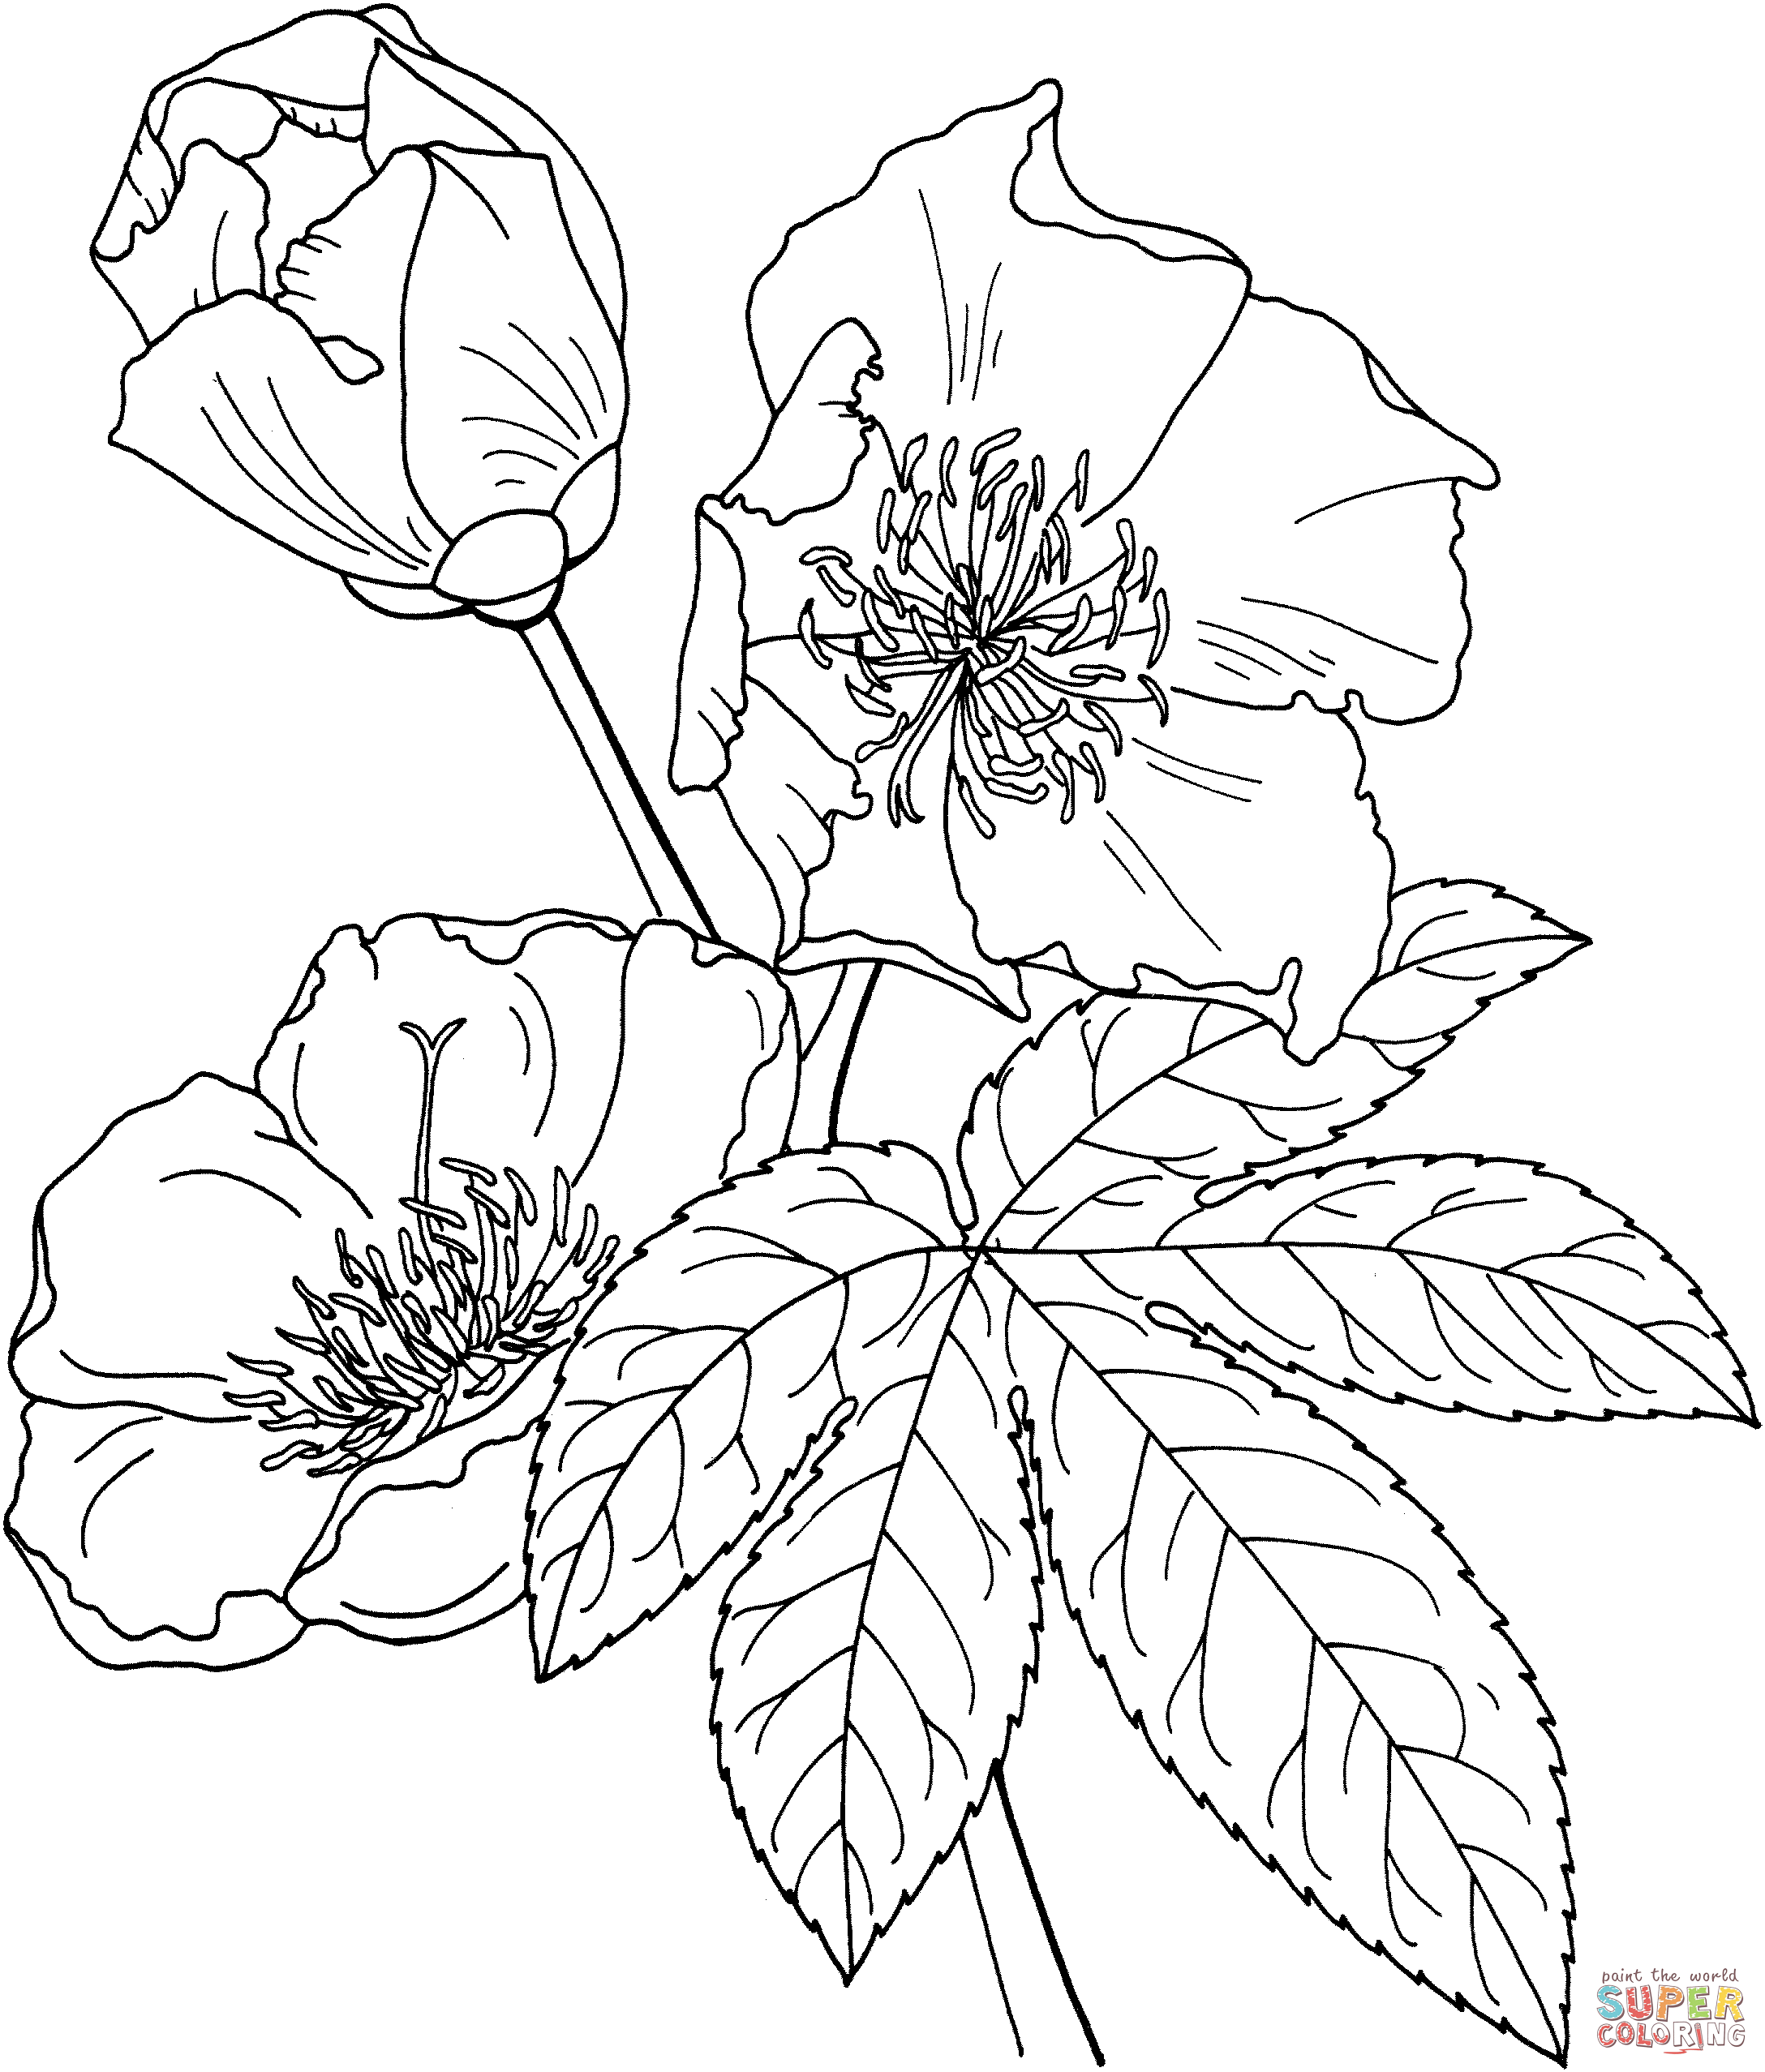 Cochlospermum Vitifolium Or Buttercup Tree Coloring Pages